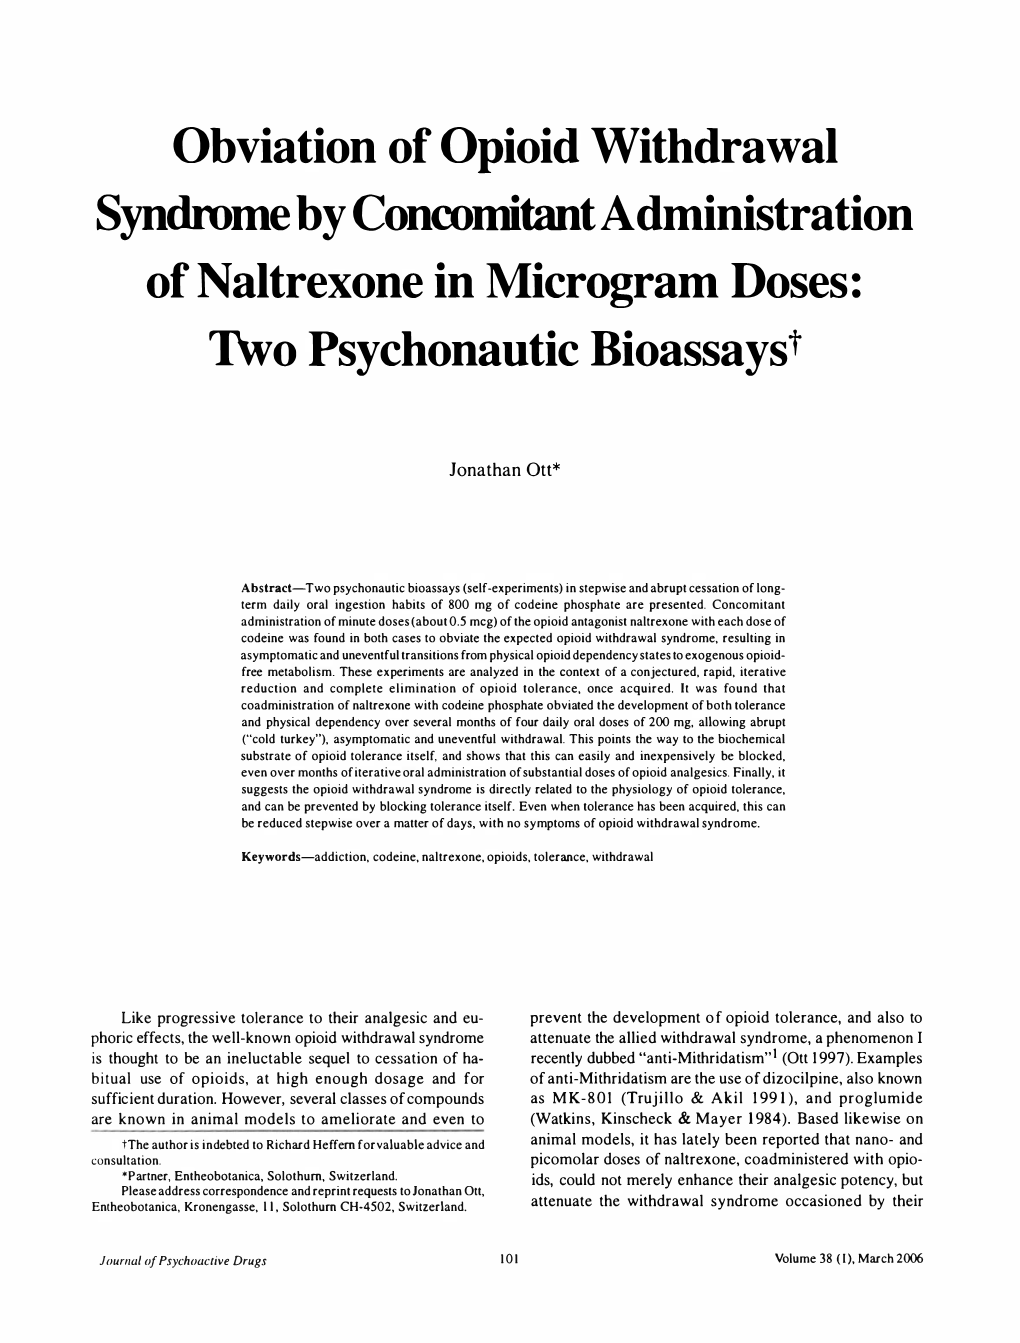 Obviation of Opioid Withdrawal Syndronte by Concomitant Adntinistration of Naltrexone in Microgrant Doses: Two Psychonautic Bioassayst